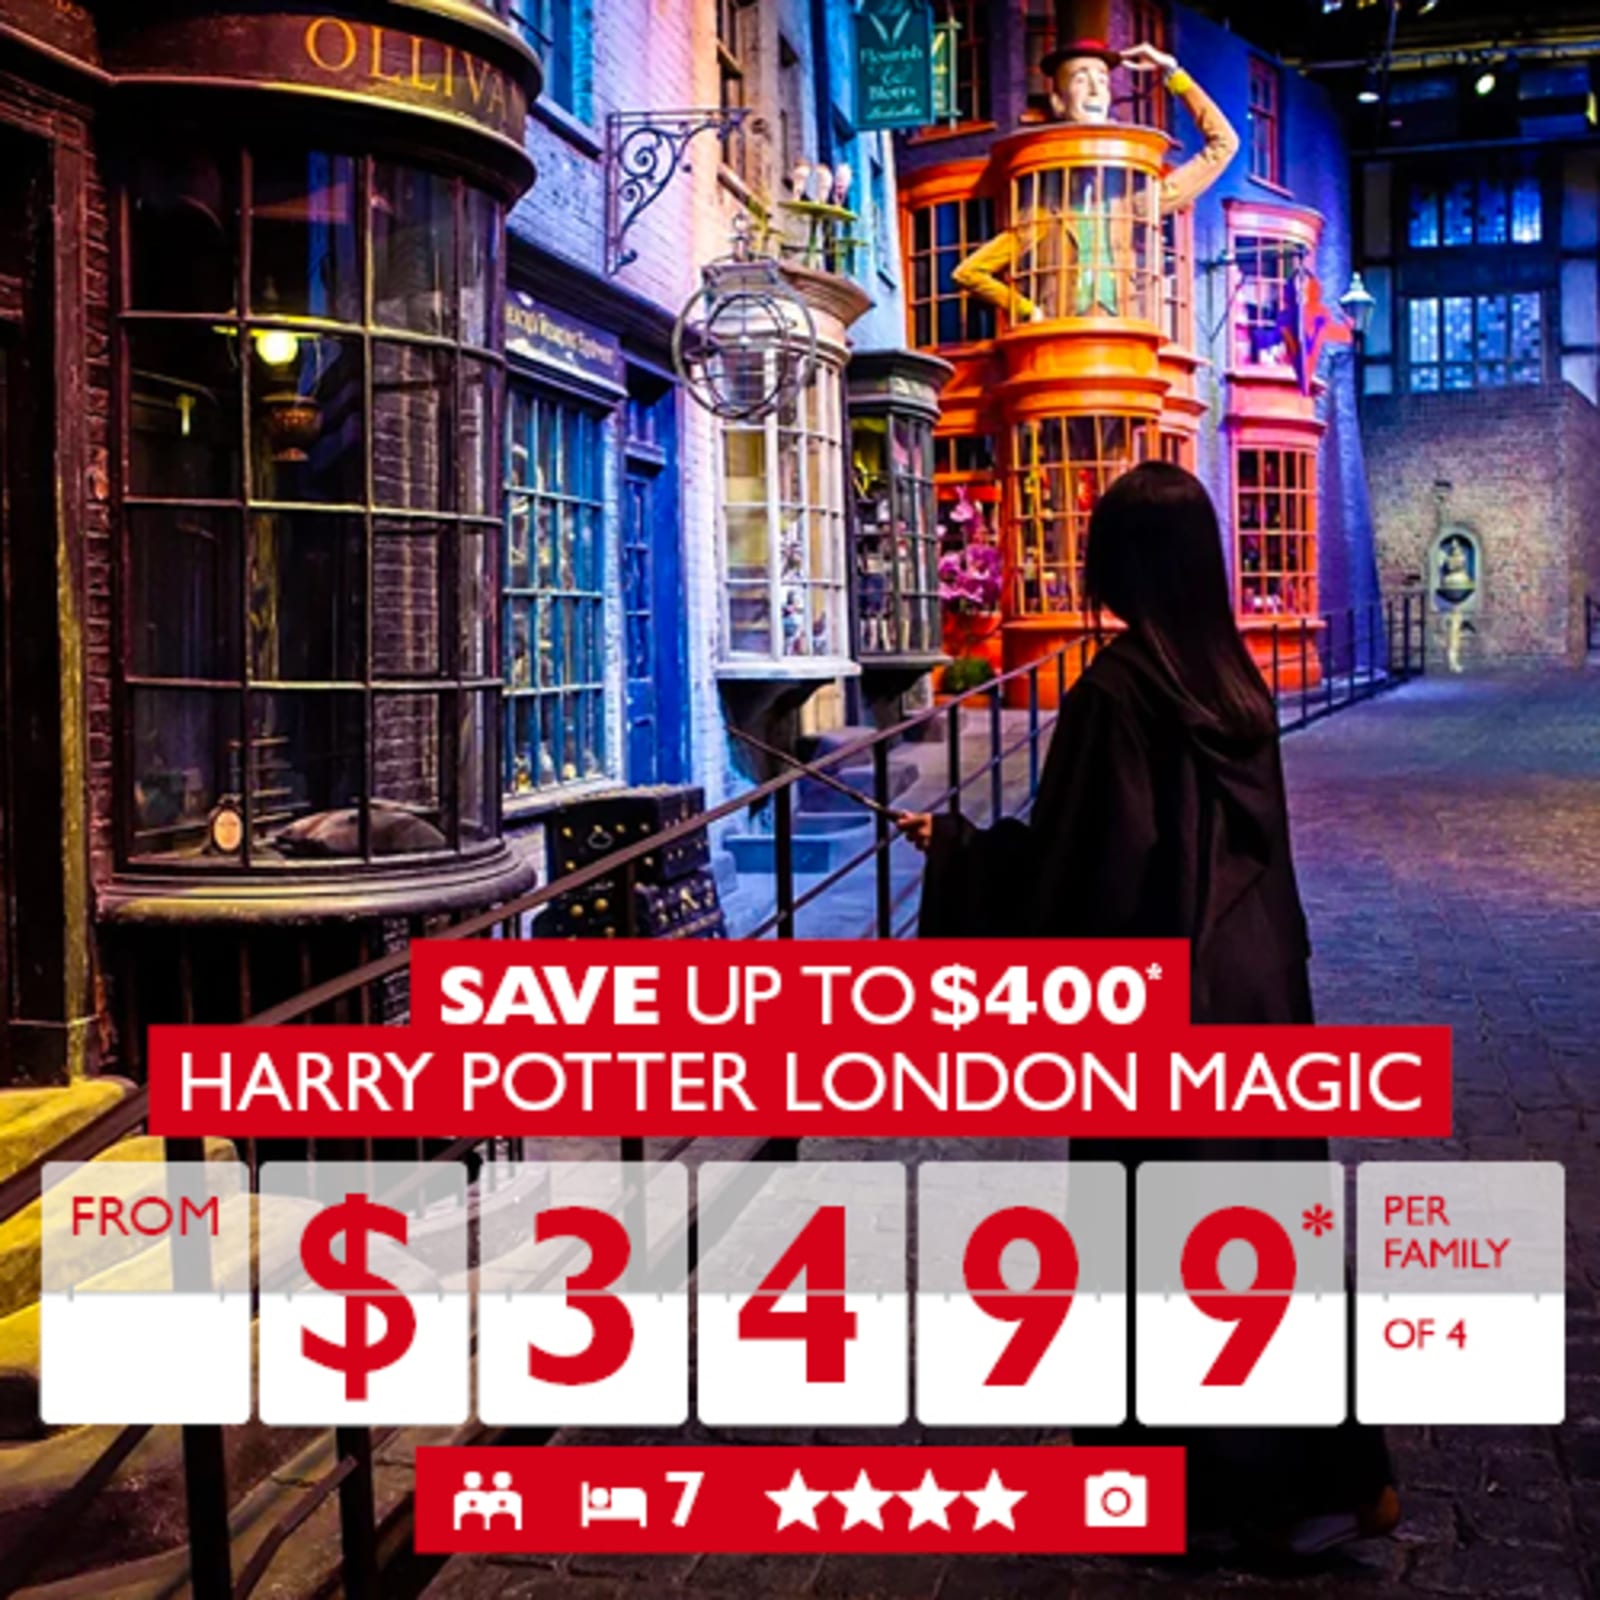 Save up to $400* Harry Potter London Magic from $3499* per family of 4